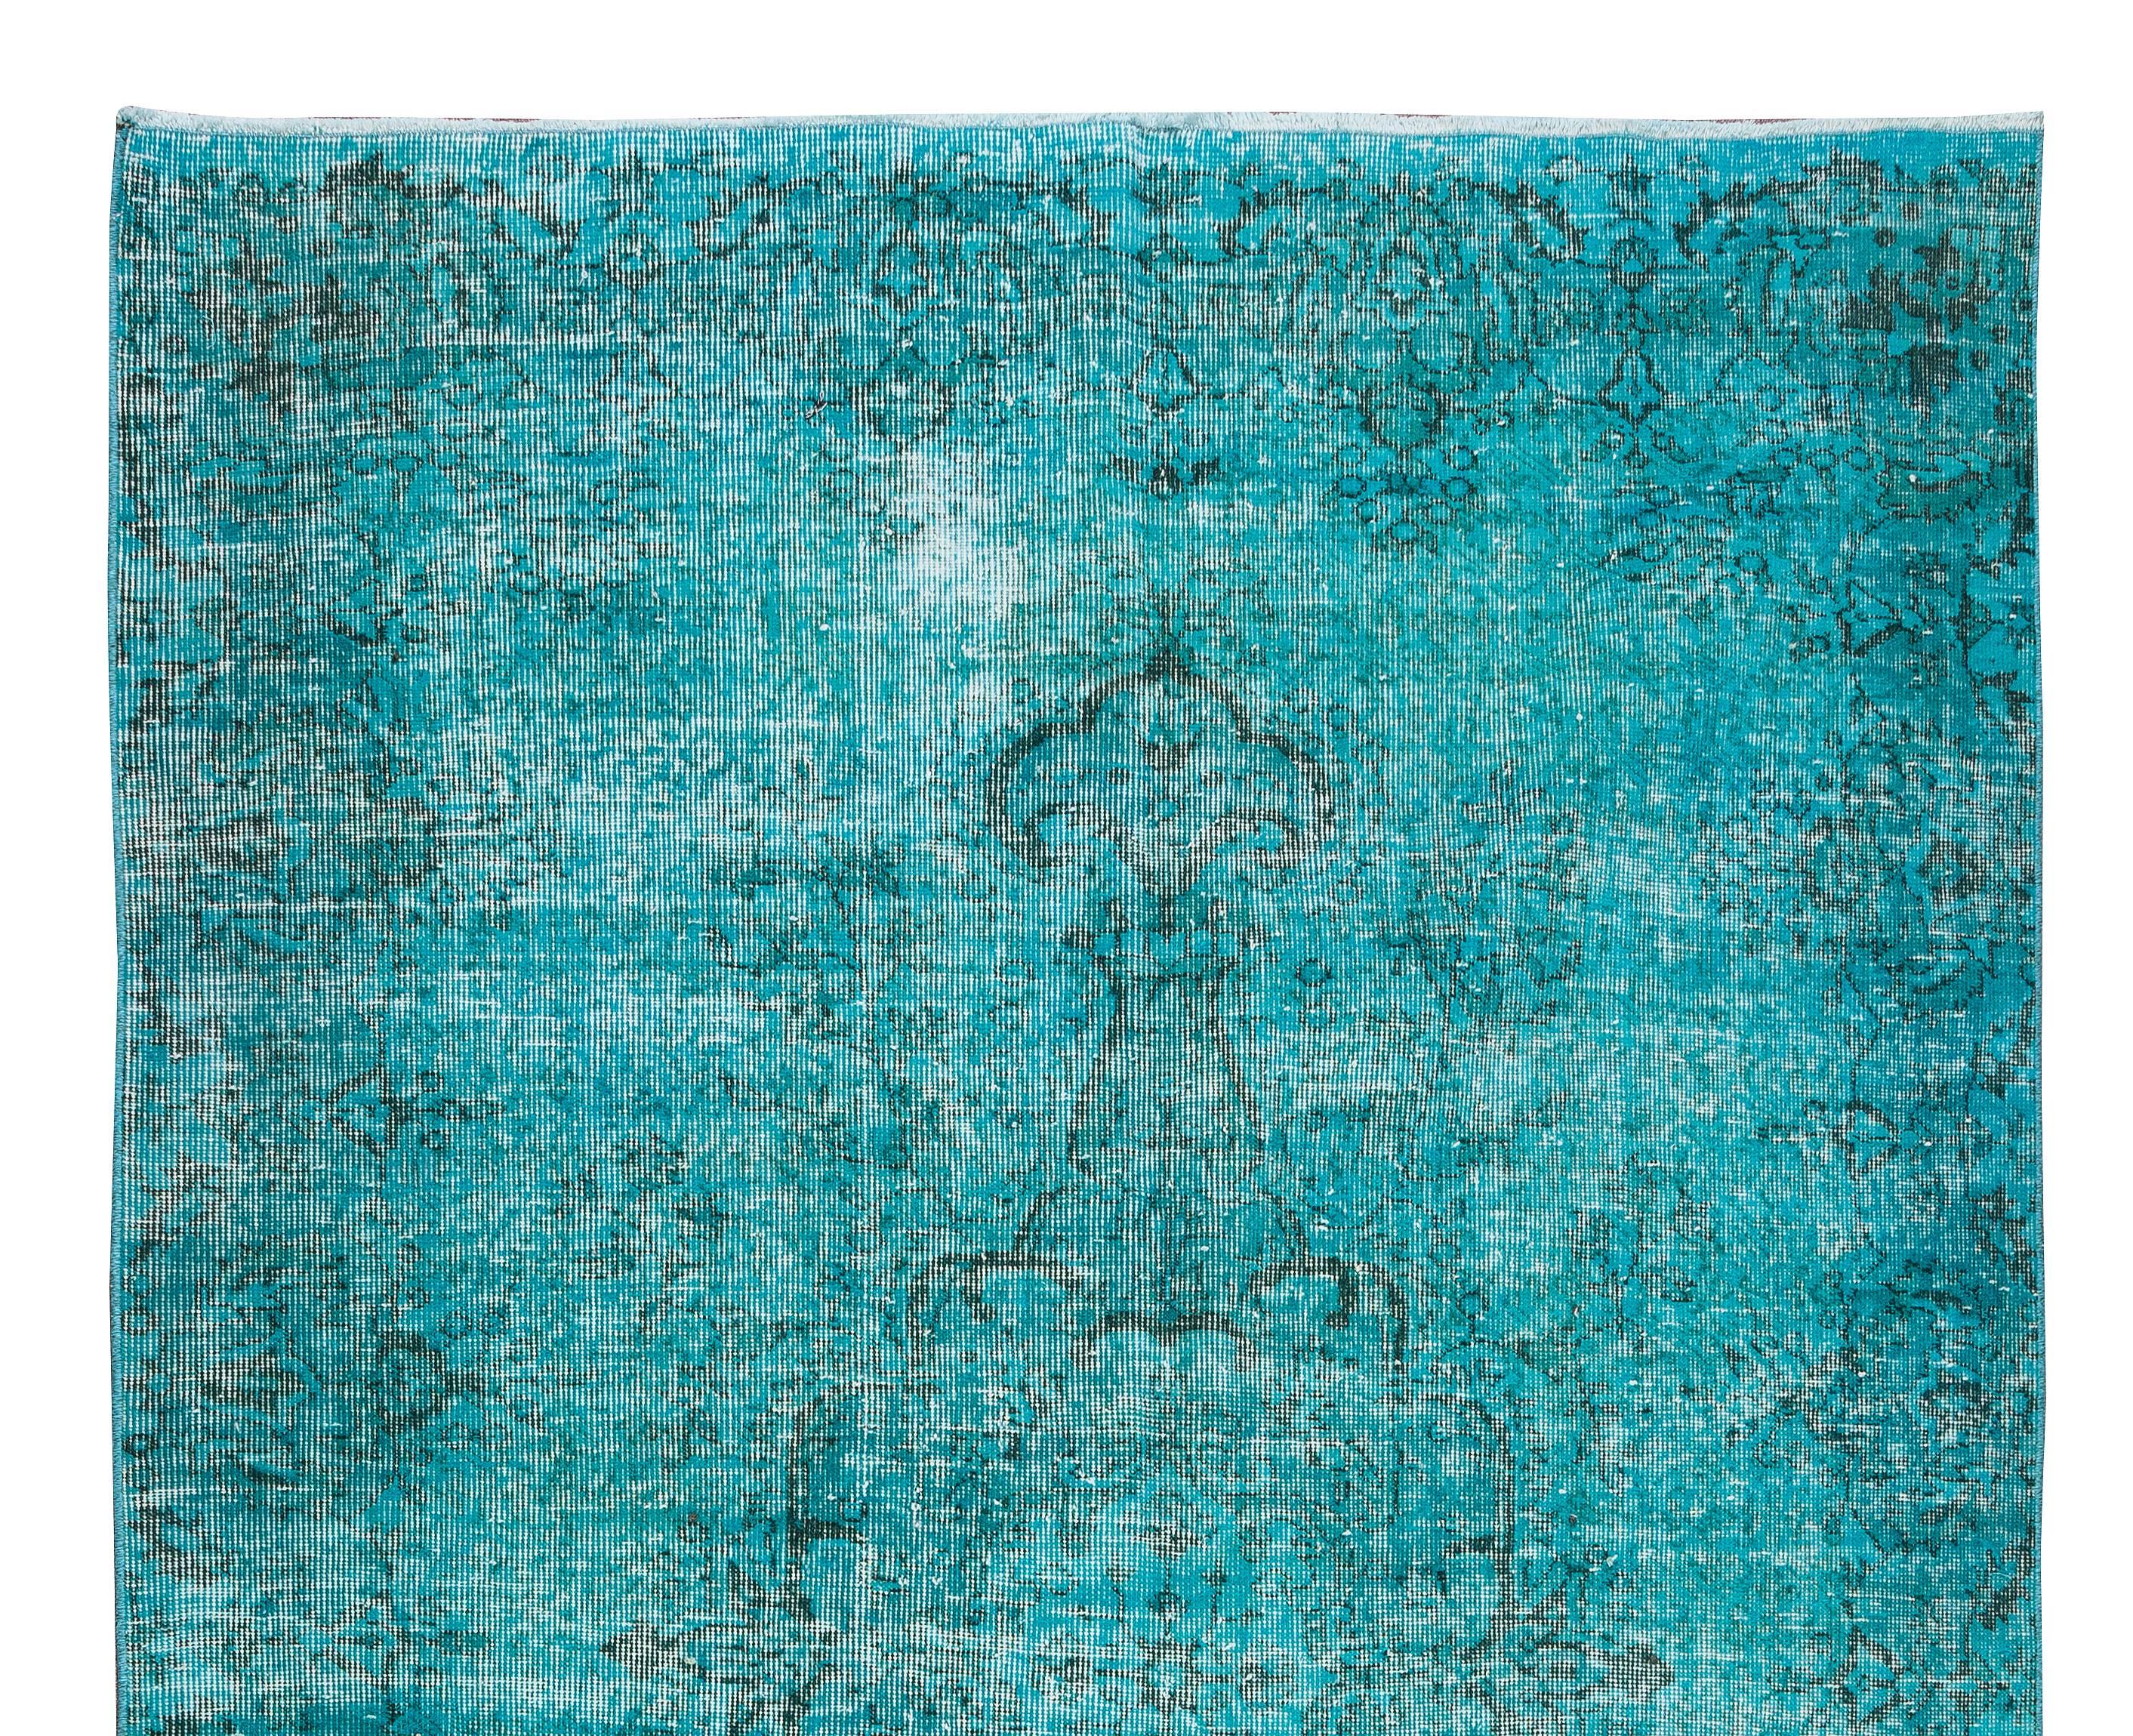 Hand-Knotted 5.5x9 Ft Modern Handmade Area Rug in Teal Blue. Vintage Anatolian Wool Carpet For Sale